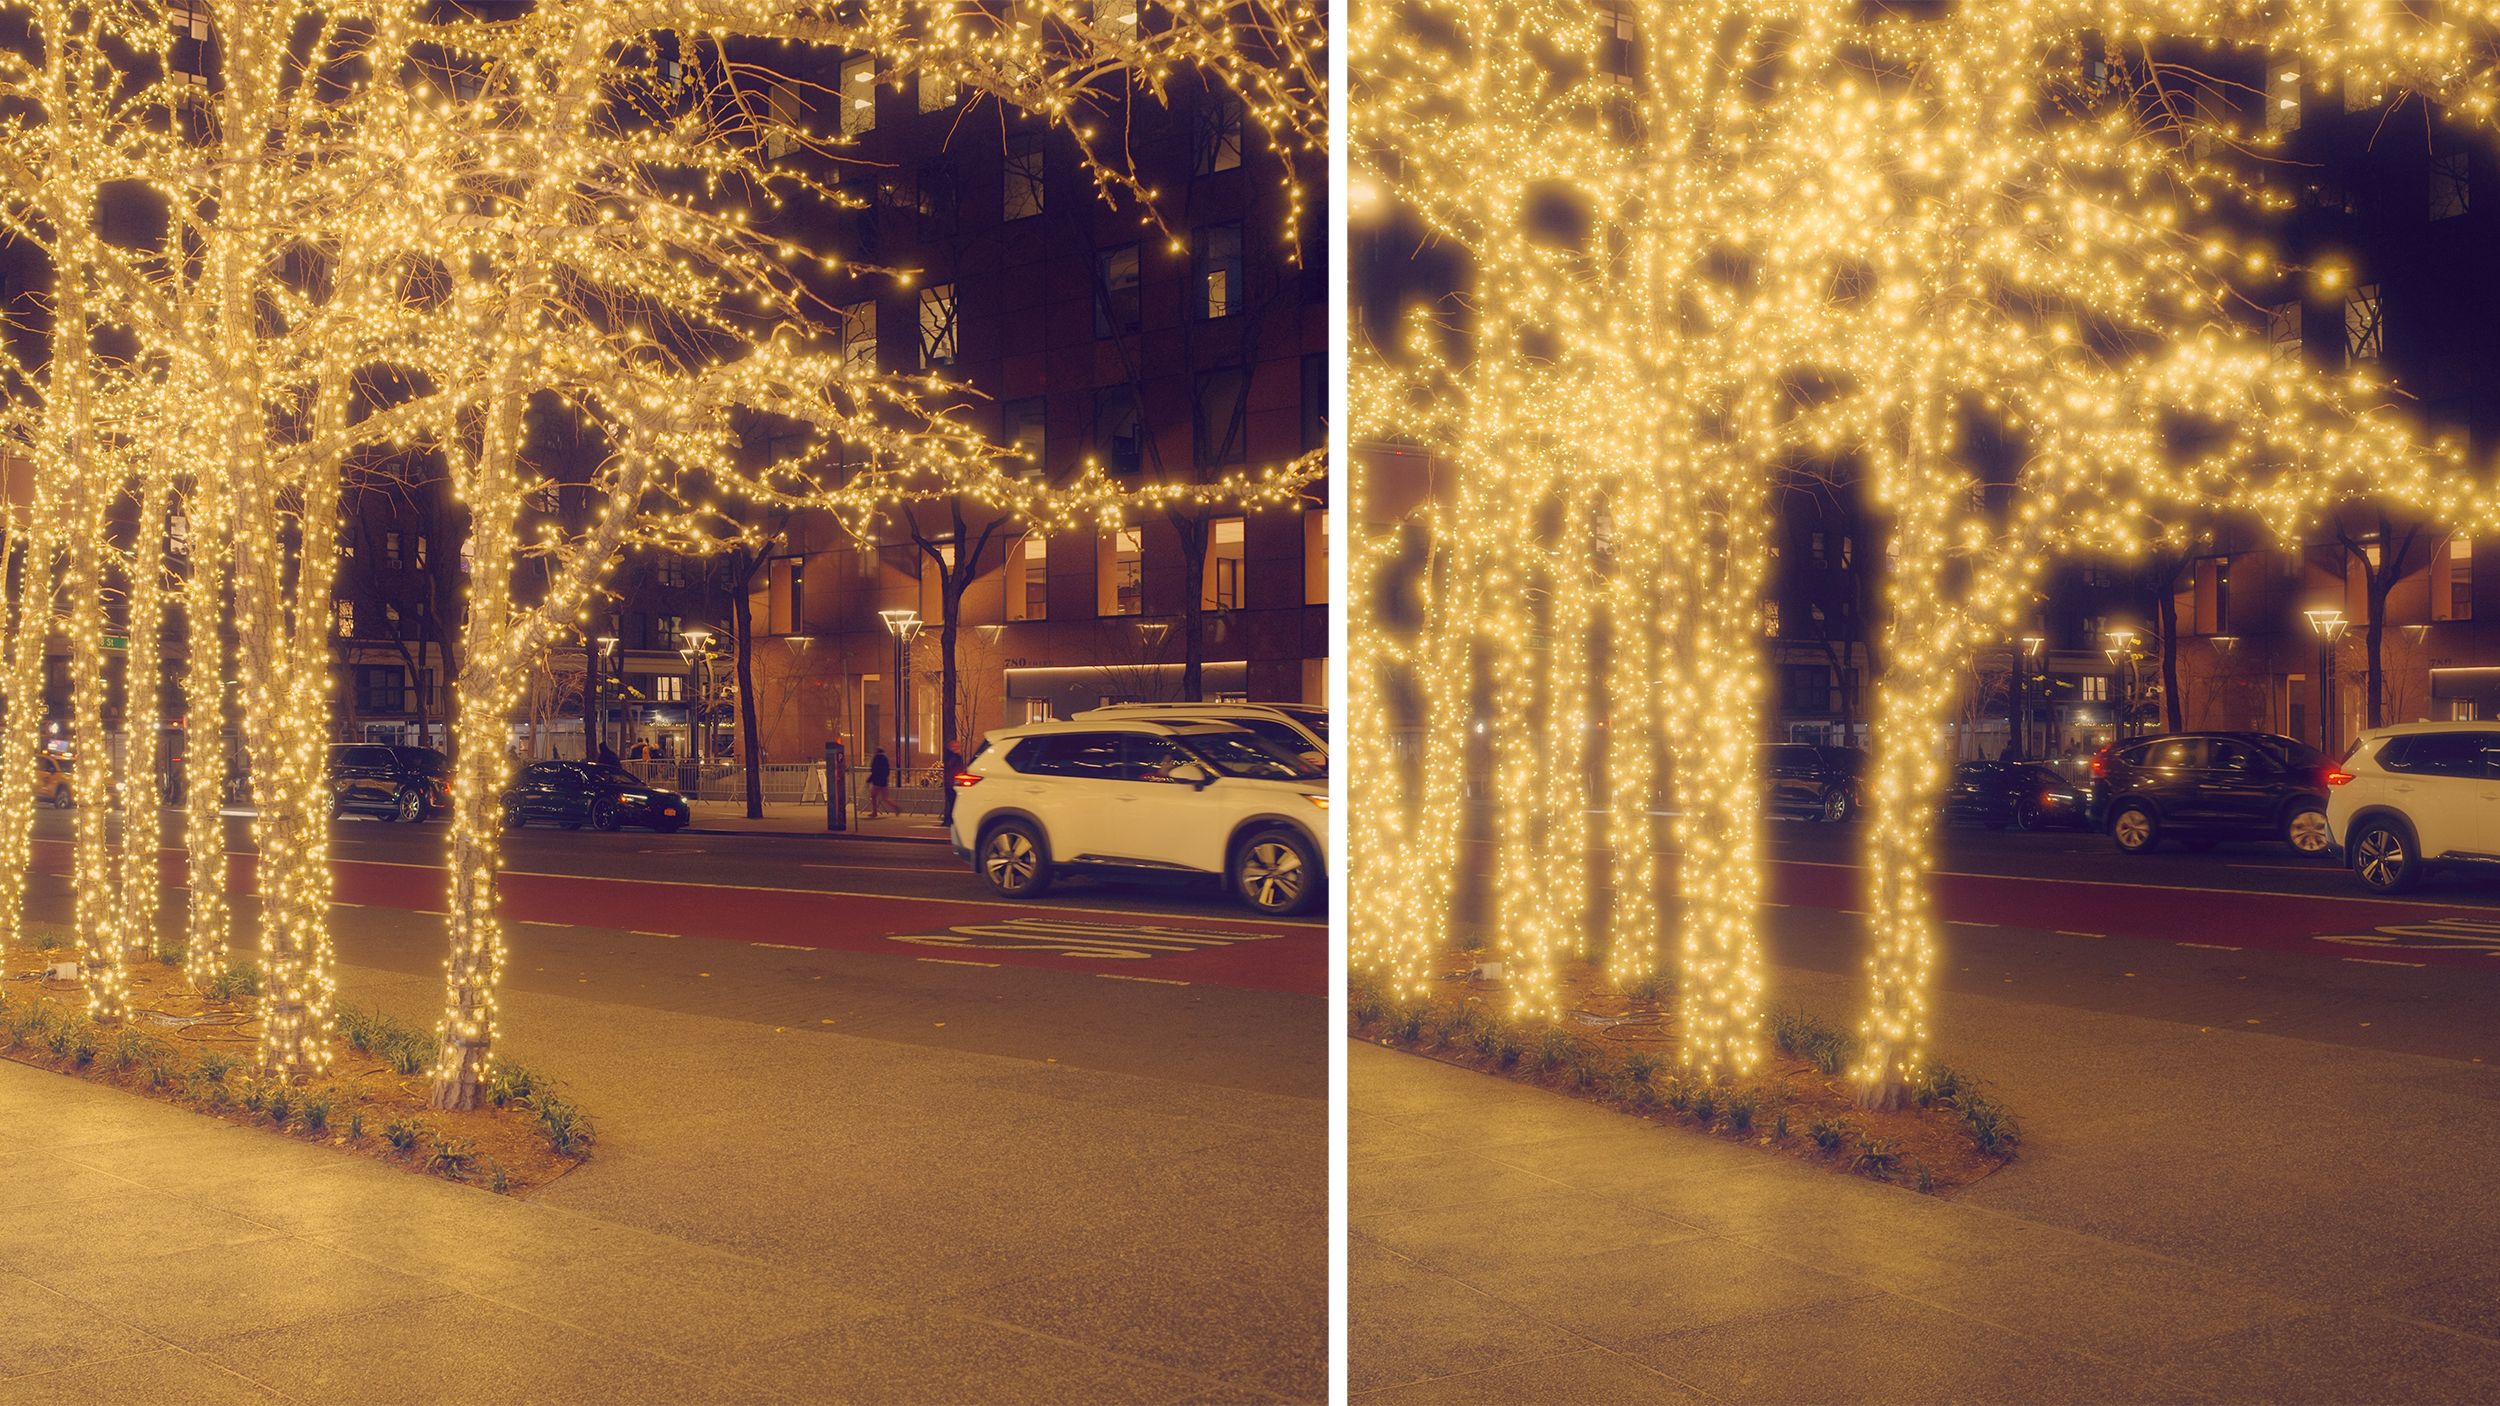 Two images of Christmas lights on trees show the soft highlights from the Ricoh GR III HDF camera. 